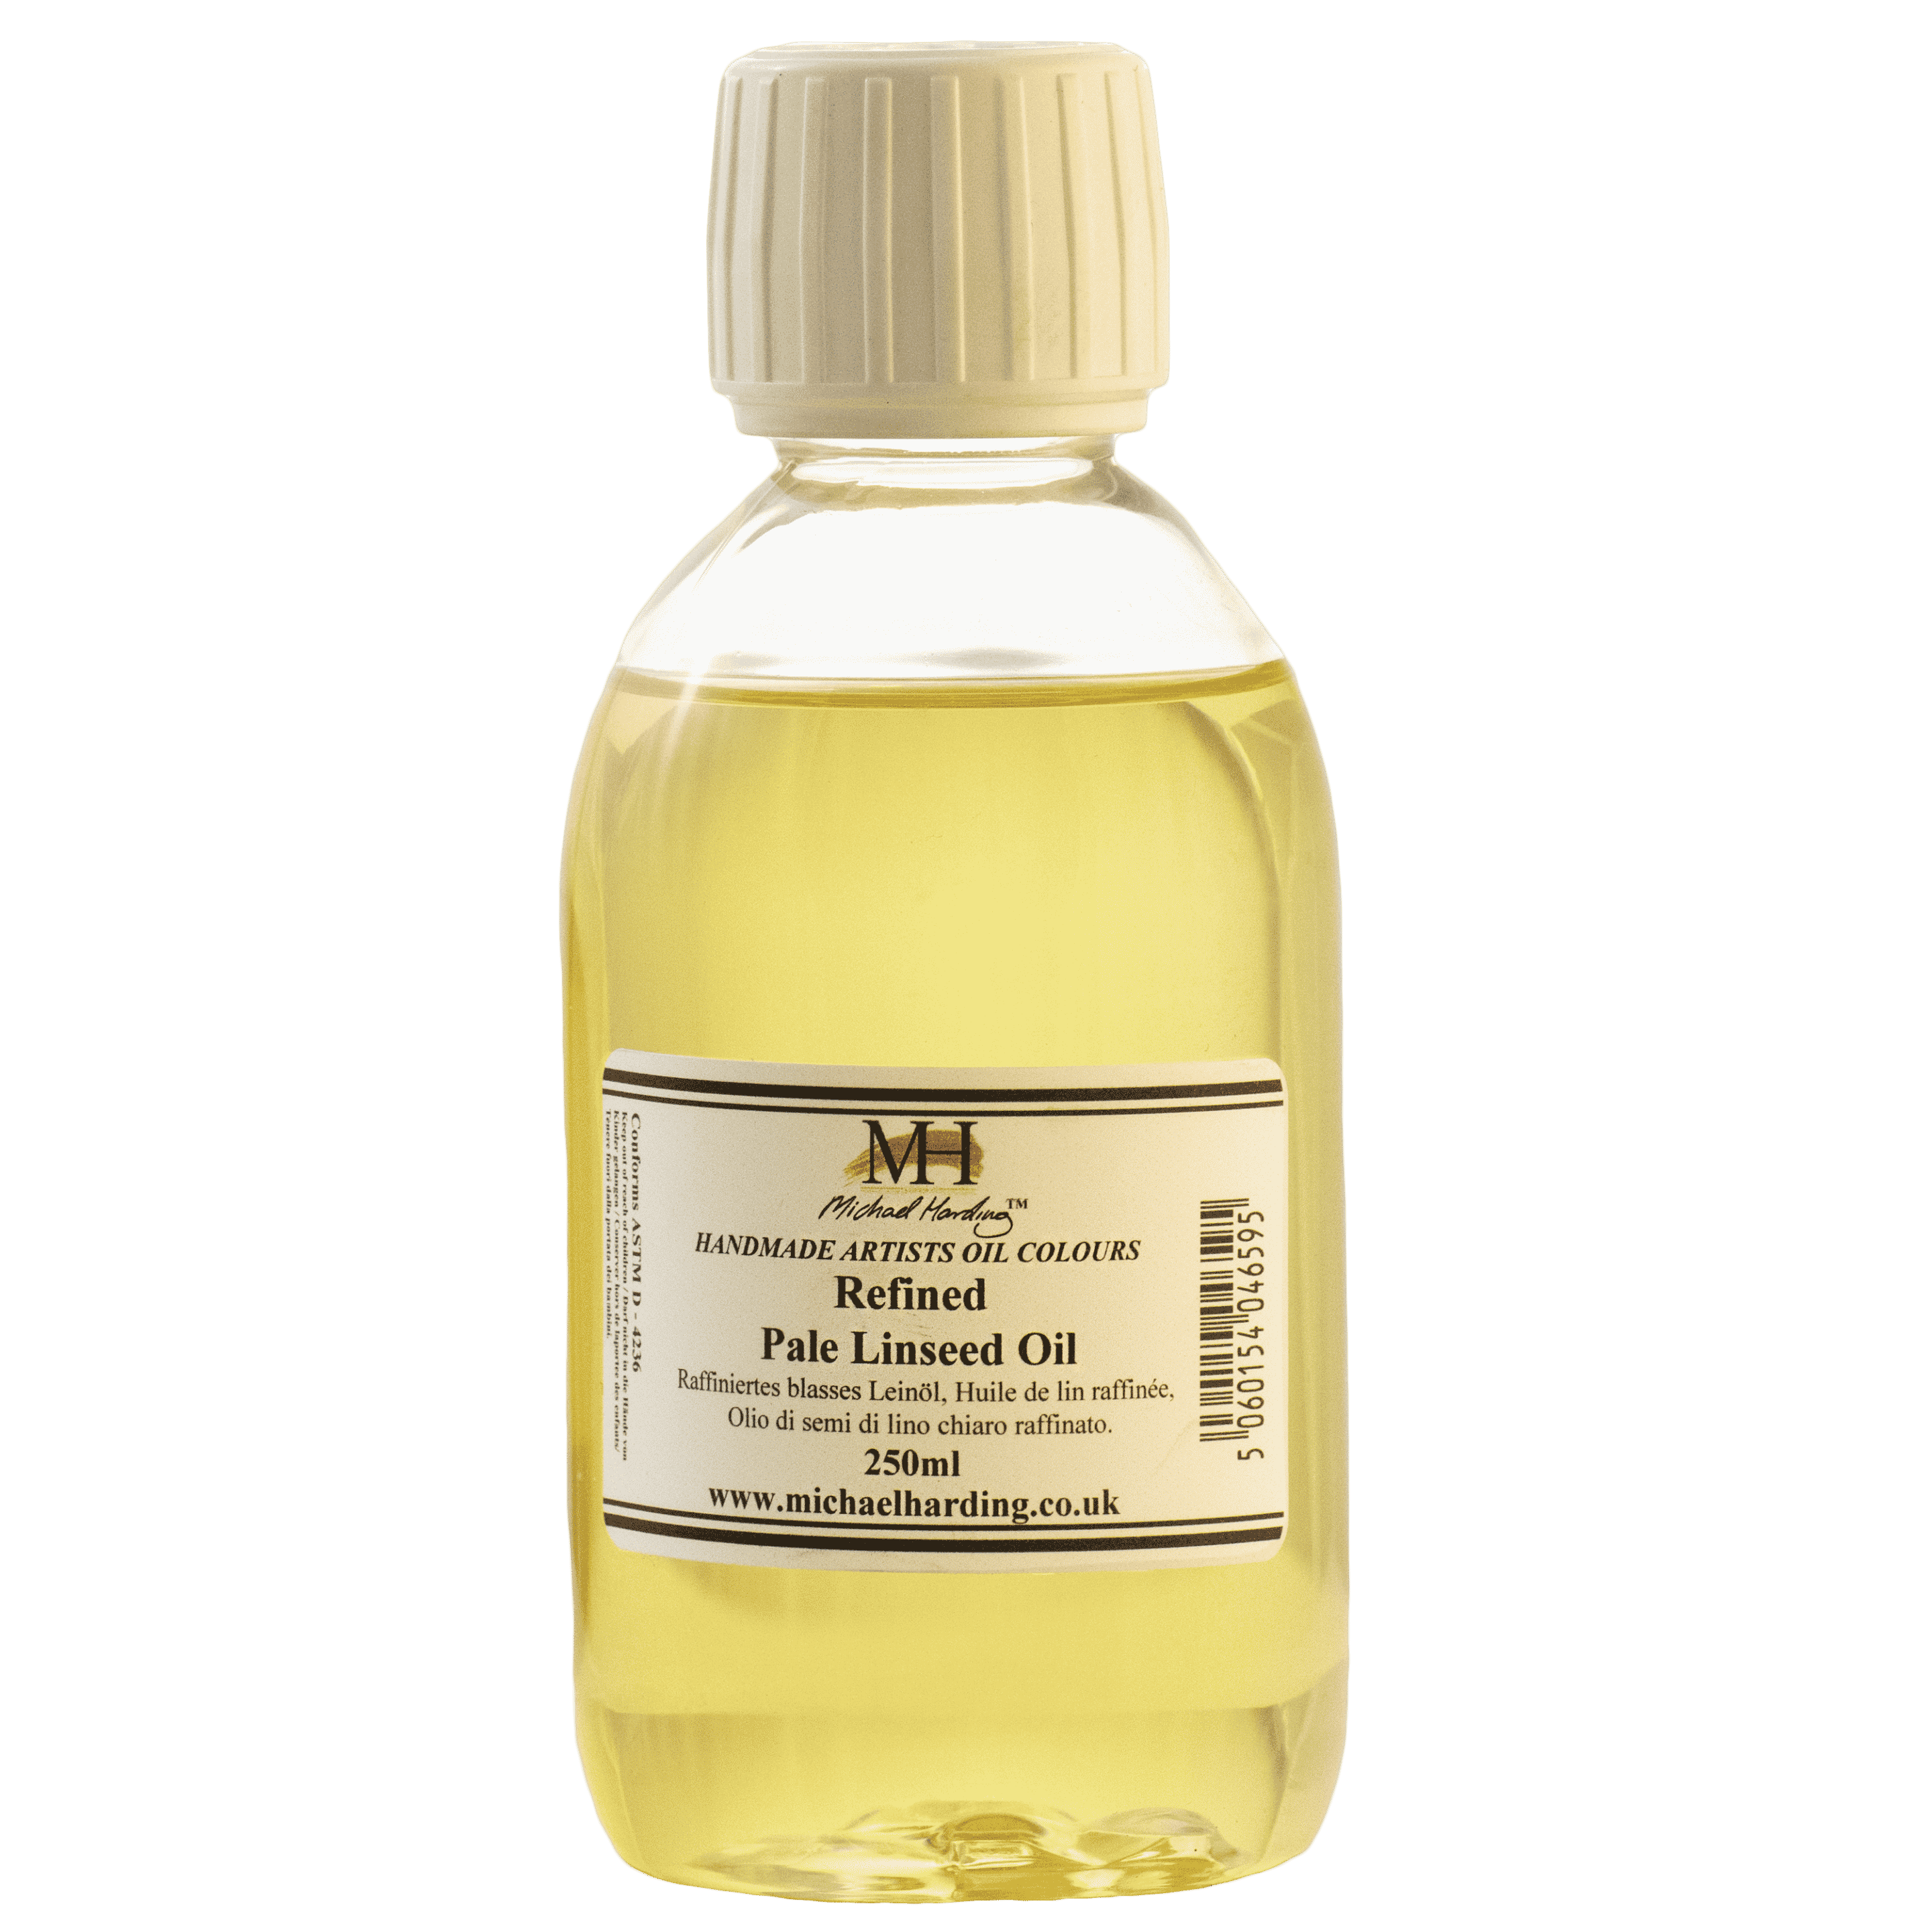 Michael Harding Refined Pale Linseed Oil - 250ml